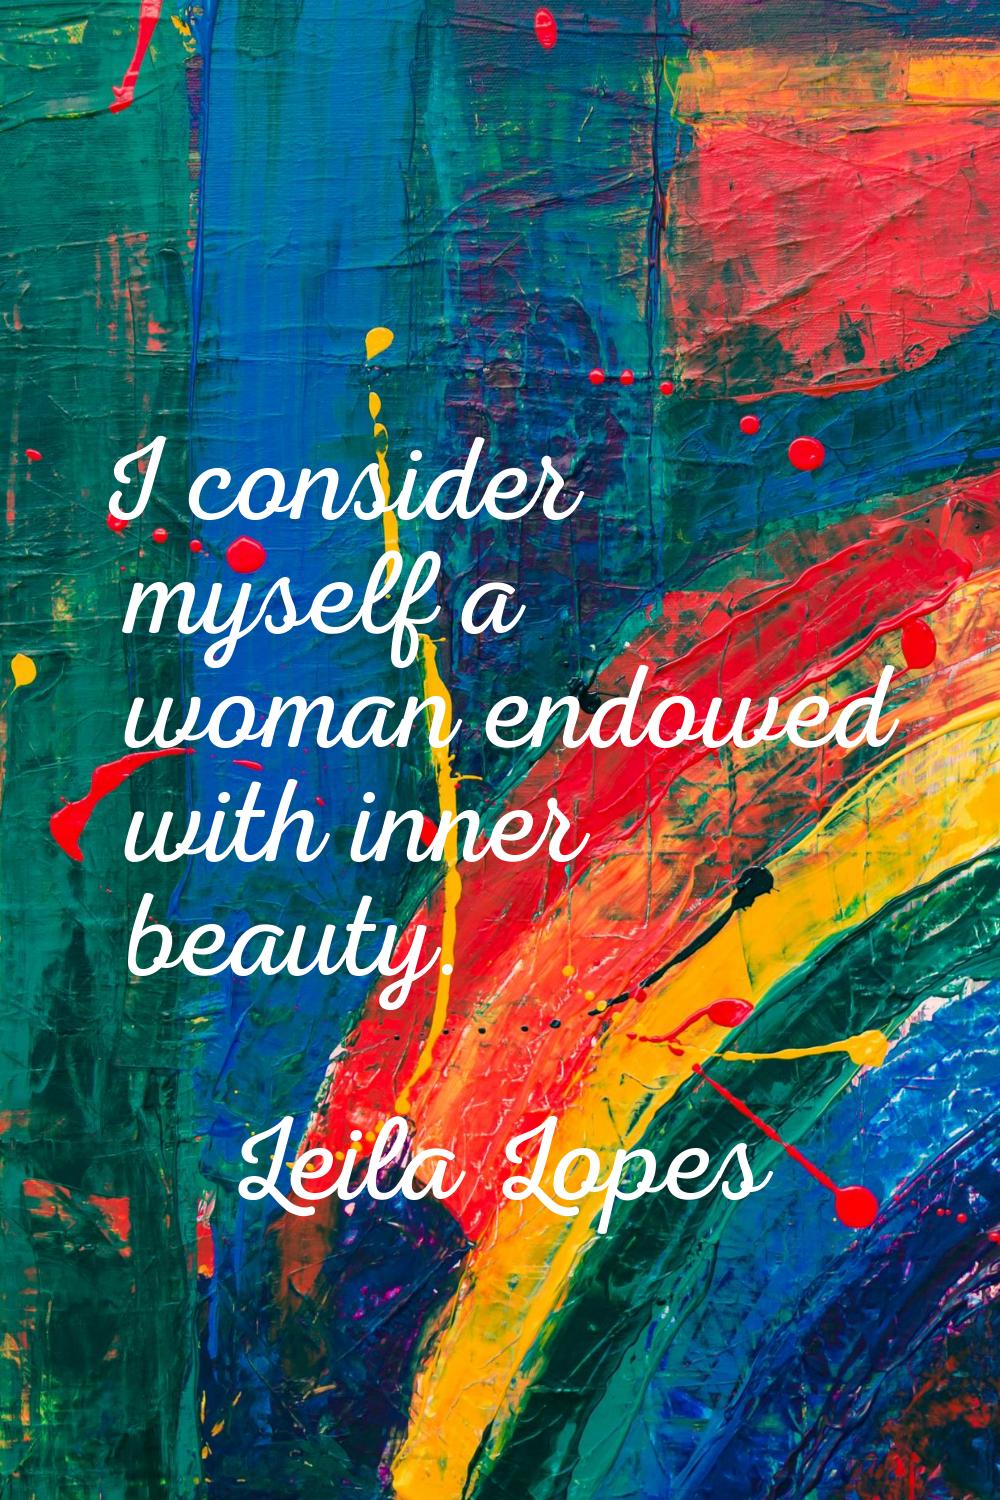 I consider myself a woman endowed with inner beauty.